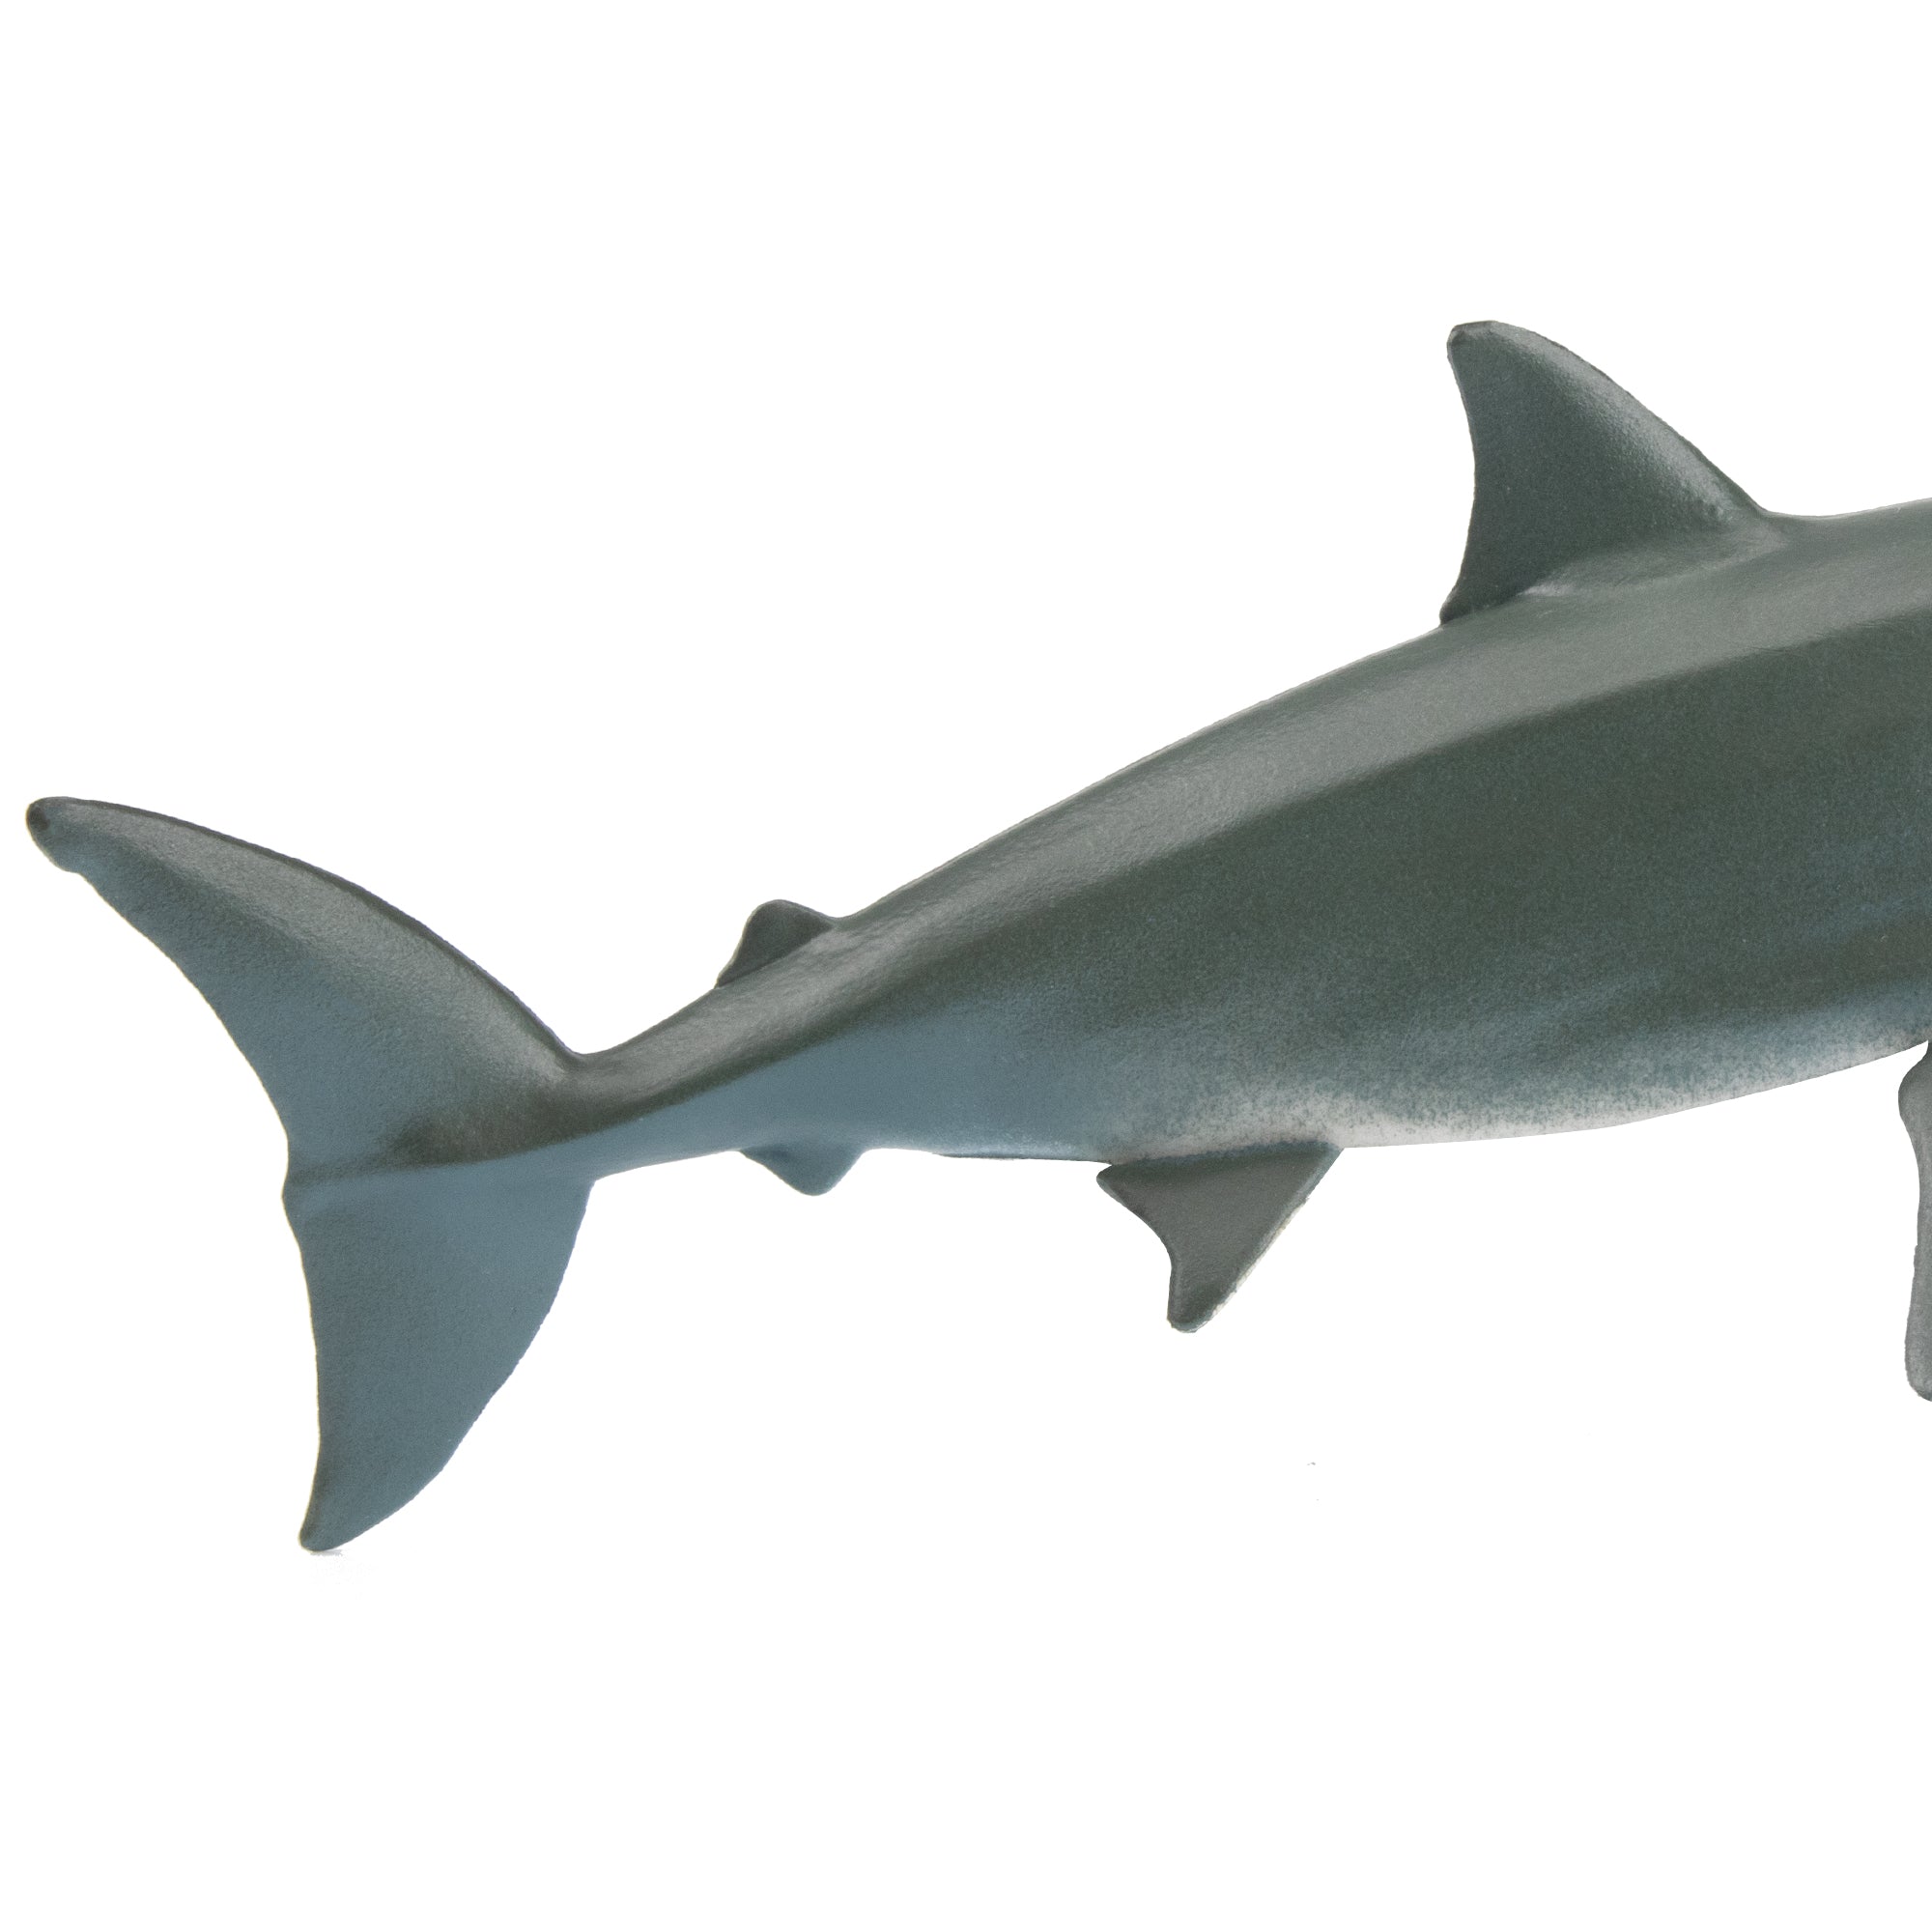 Toymany Open-Mouthed Great White Shark Figurine Toy-tail